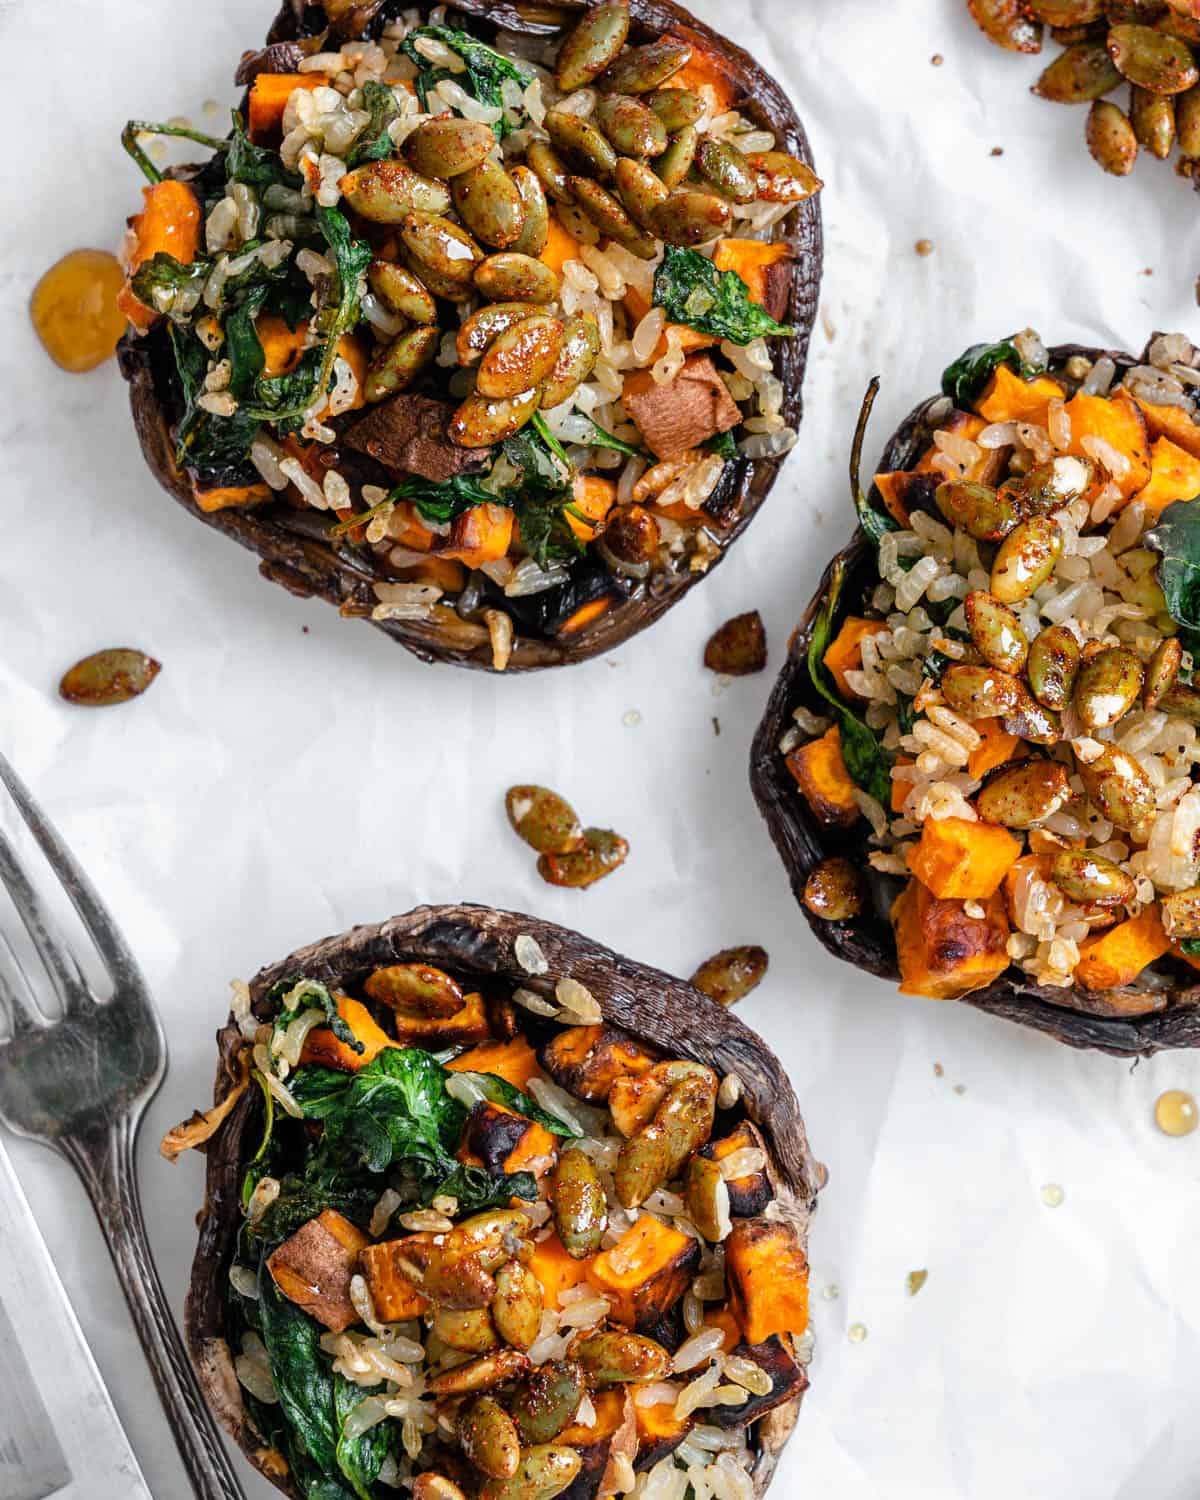 completed Healthy Wild Rice & Spinach Stuffed Mushrooms against a white surface